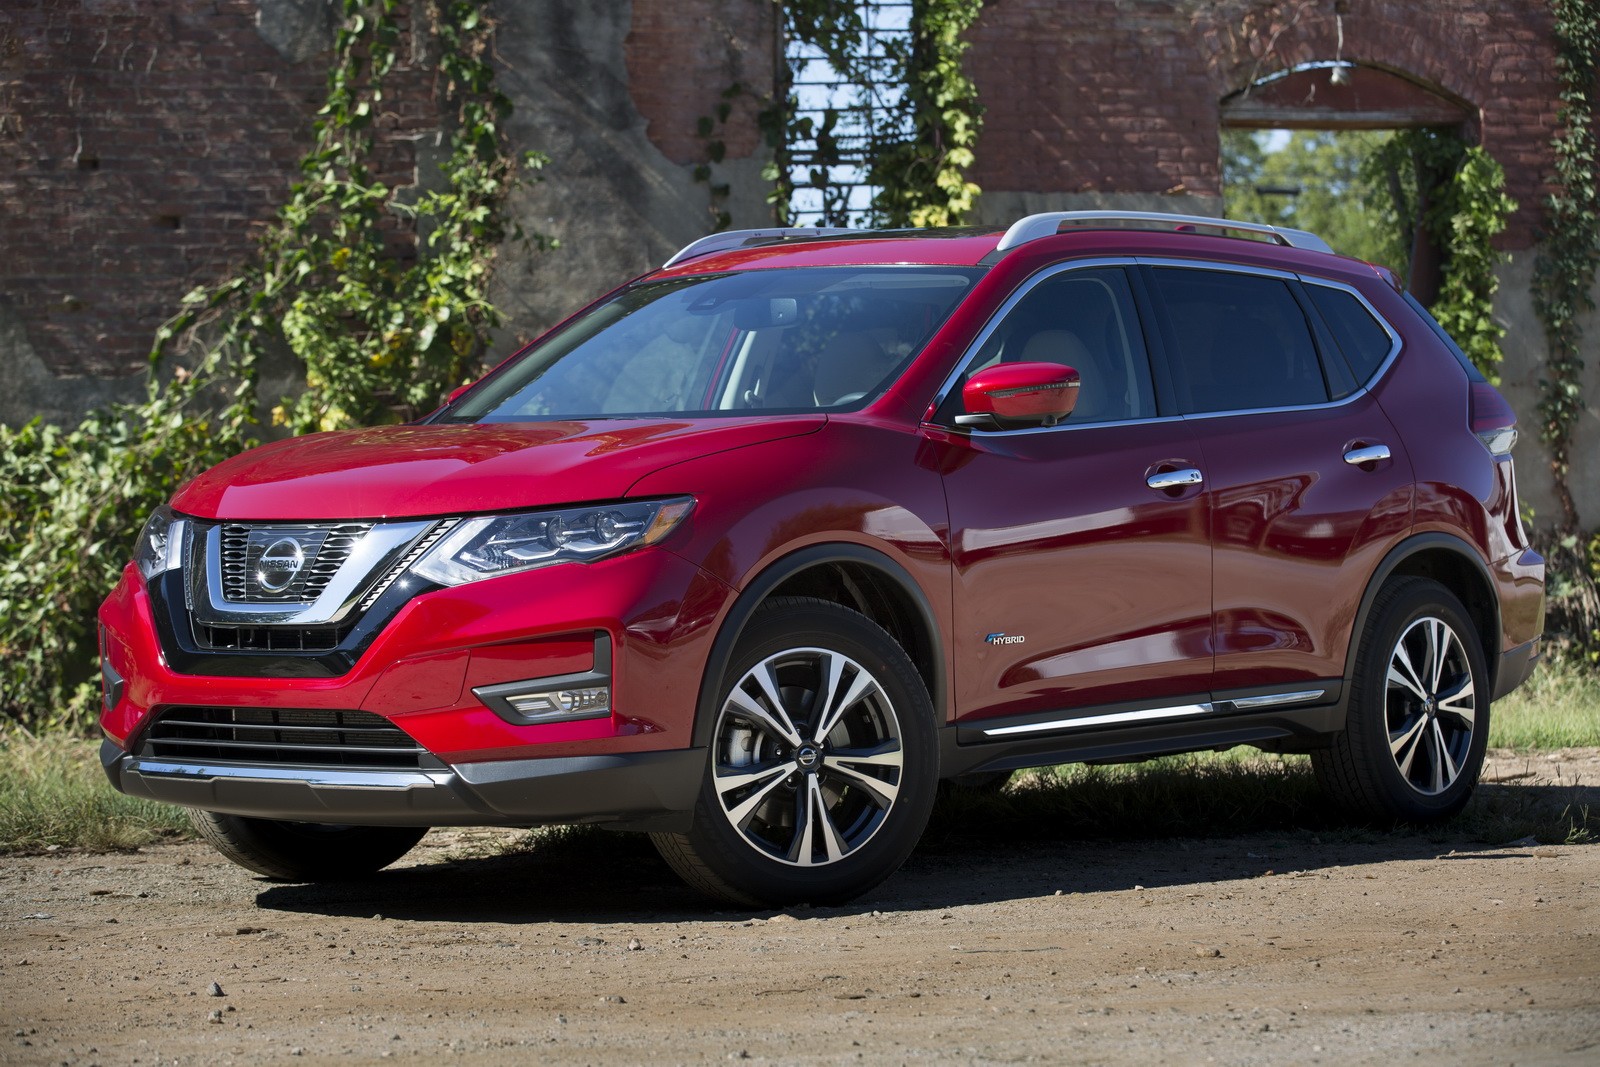 2017 Nissan Rogue Hybrid Now Available to Order, Priced From 26,240